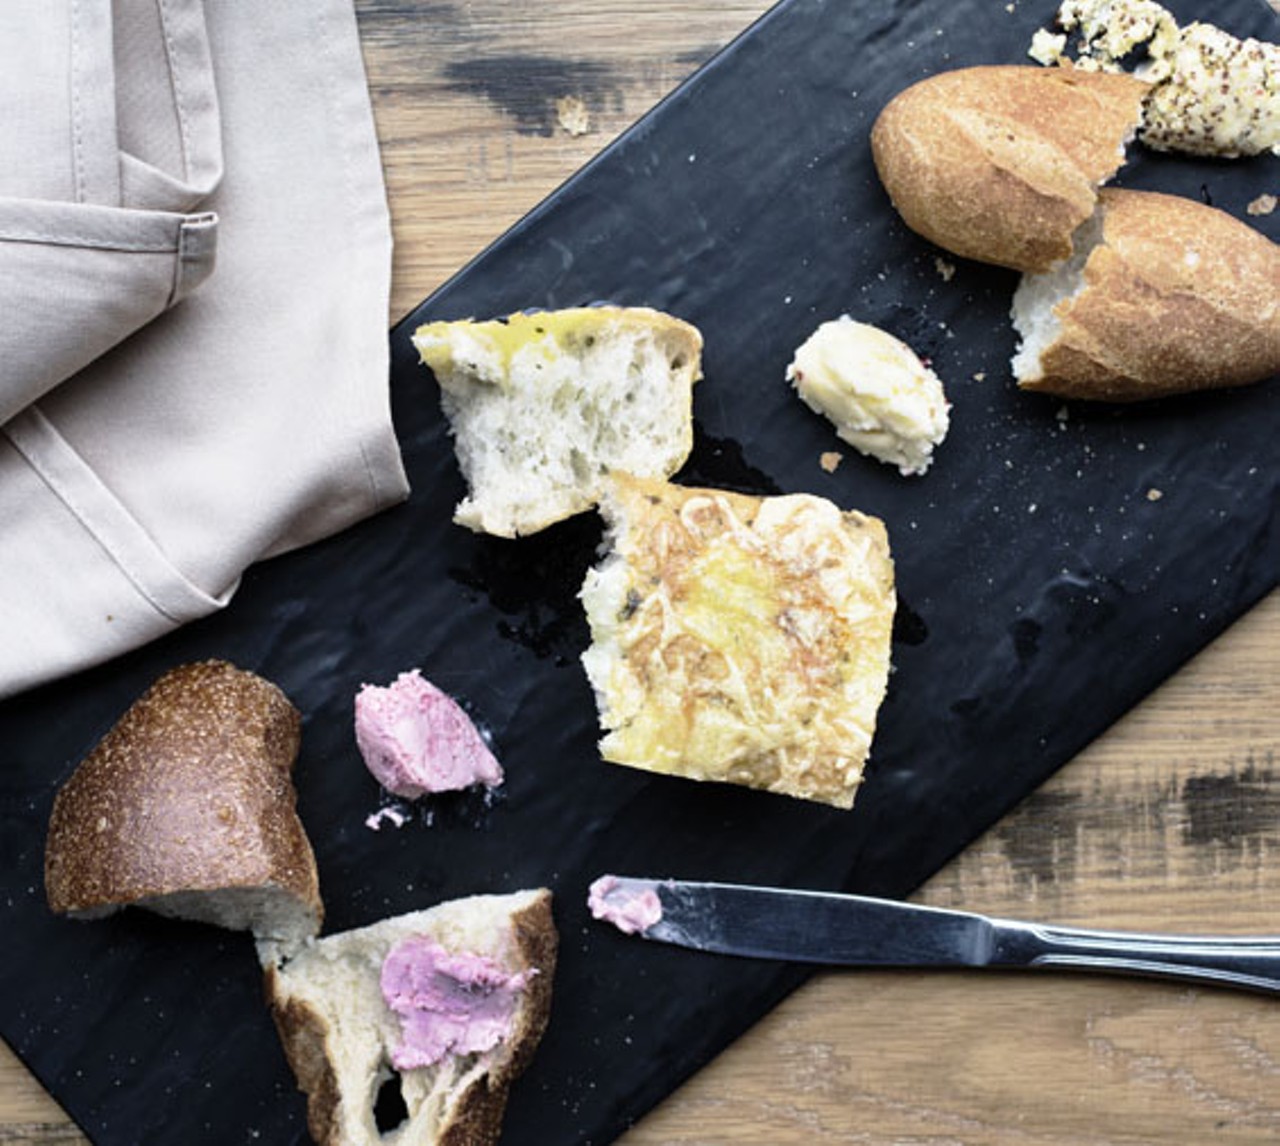 Gamlin's bread board includes beer bread, foccacia and baguette, all made in-house and served with your choice of butters. Shown here are the roasted marrow, mustard, and autumn butters.